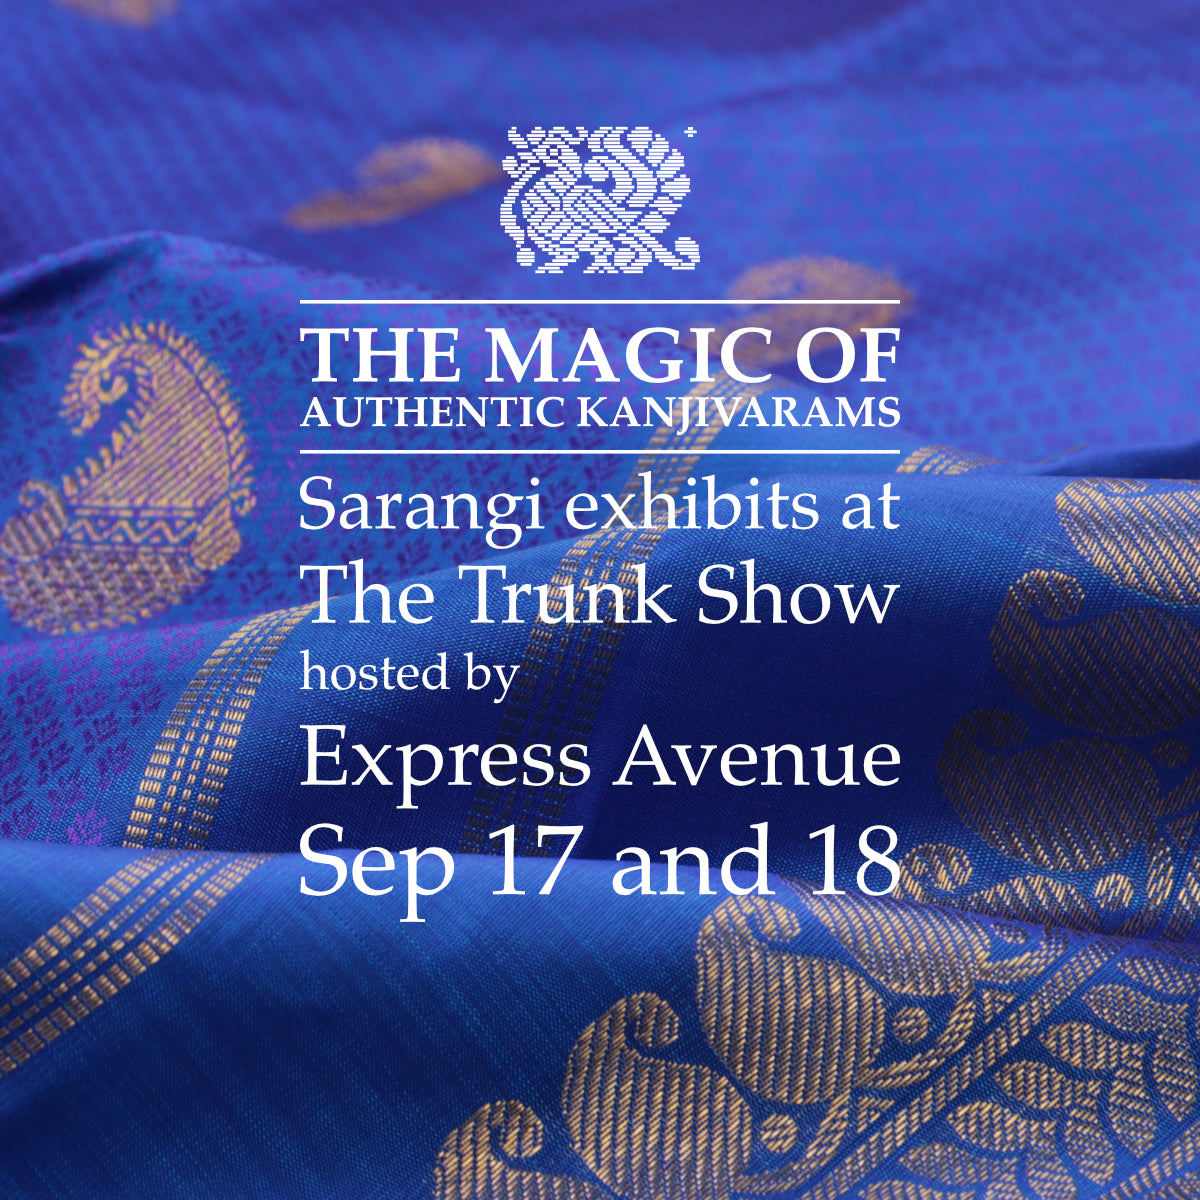 Sarangi to exhibit at the Trunk Show by Express Avenue